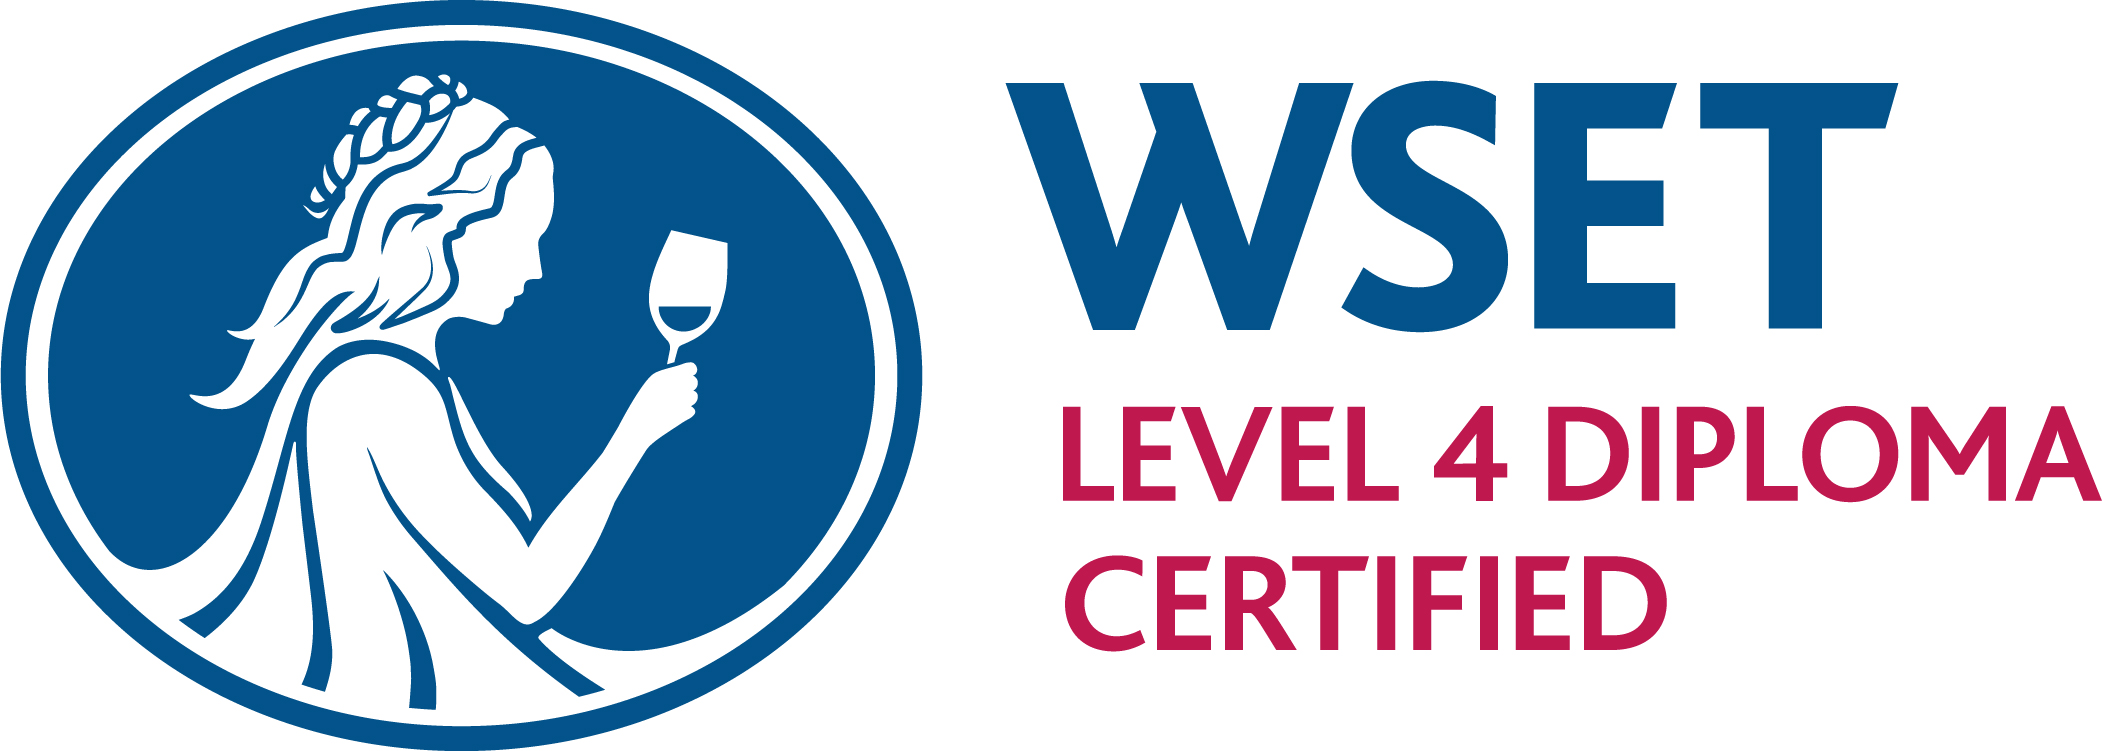 WSET Level 4 Diploma Certified